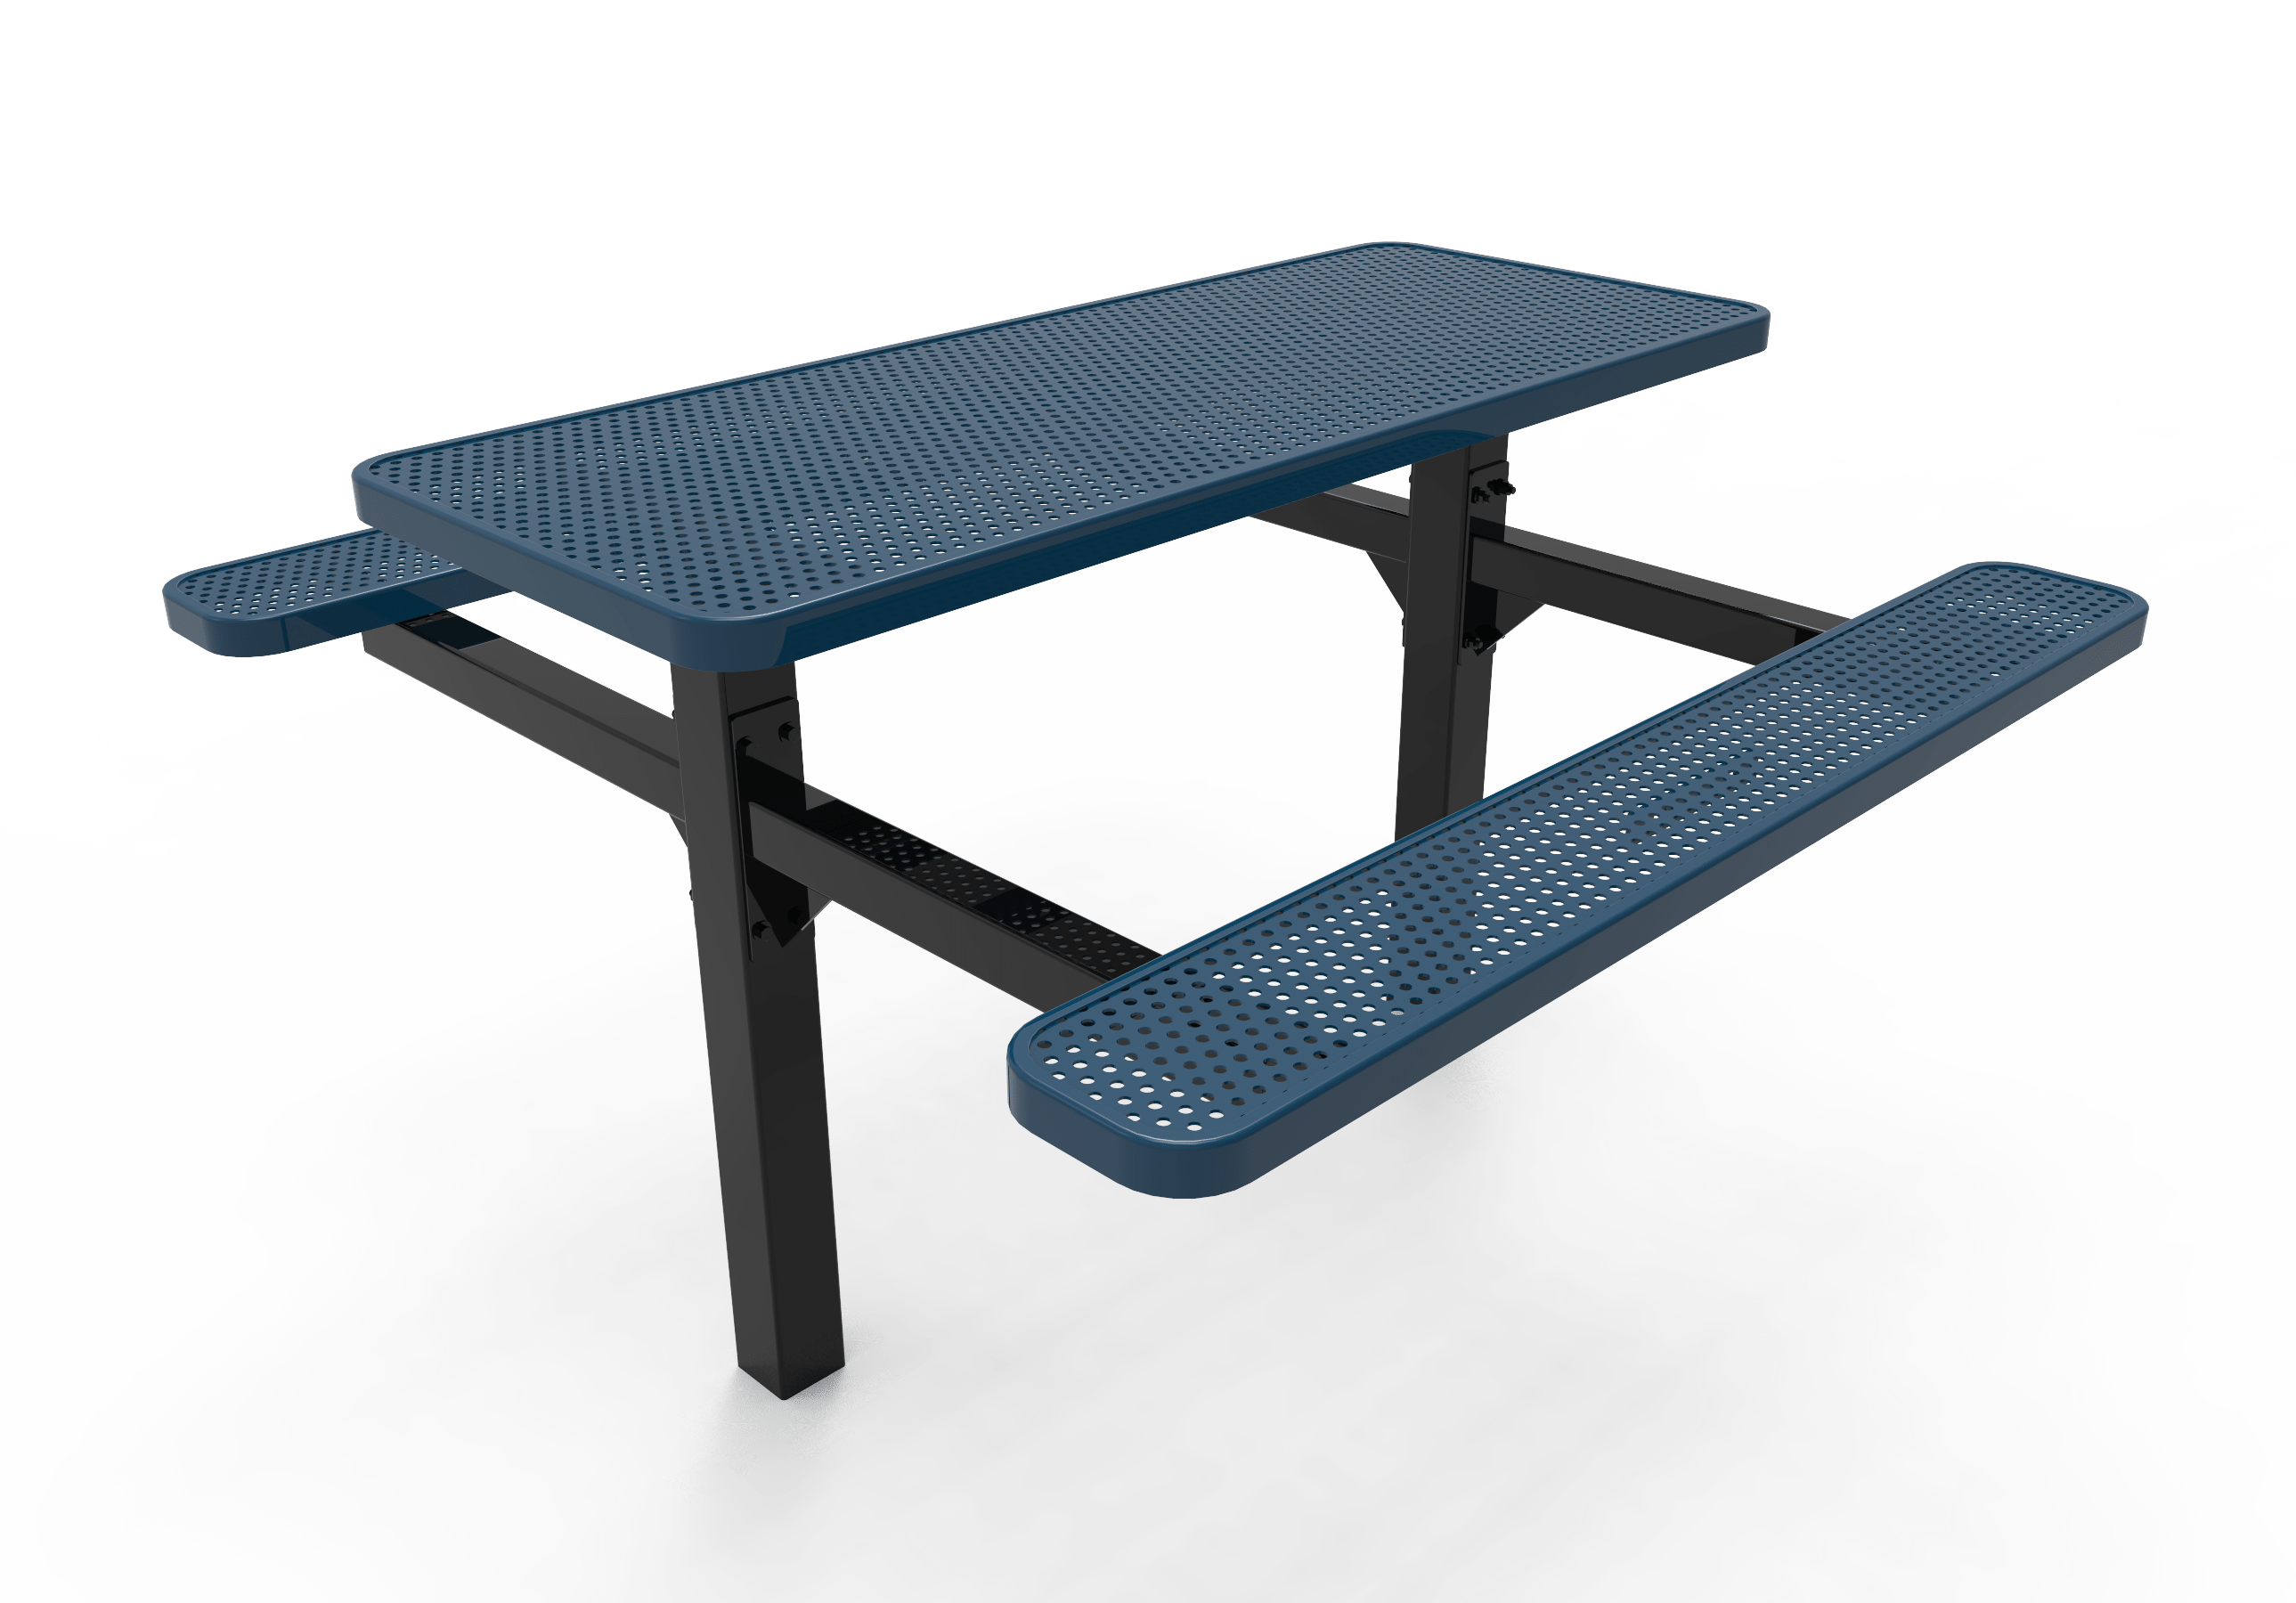 6′ Double Pedestal Picnic Table In Ground-Punched
TRT06-D-08-000
Industry Standard Finish
$2229.00
TRT06-B-08-000
Advantage Premium Finish
$2739.00
